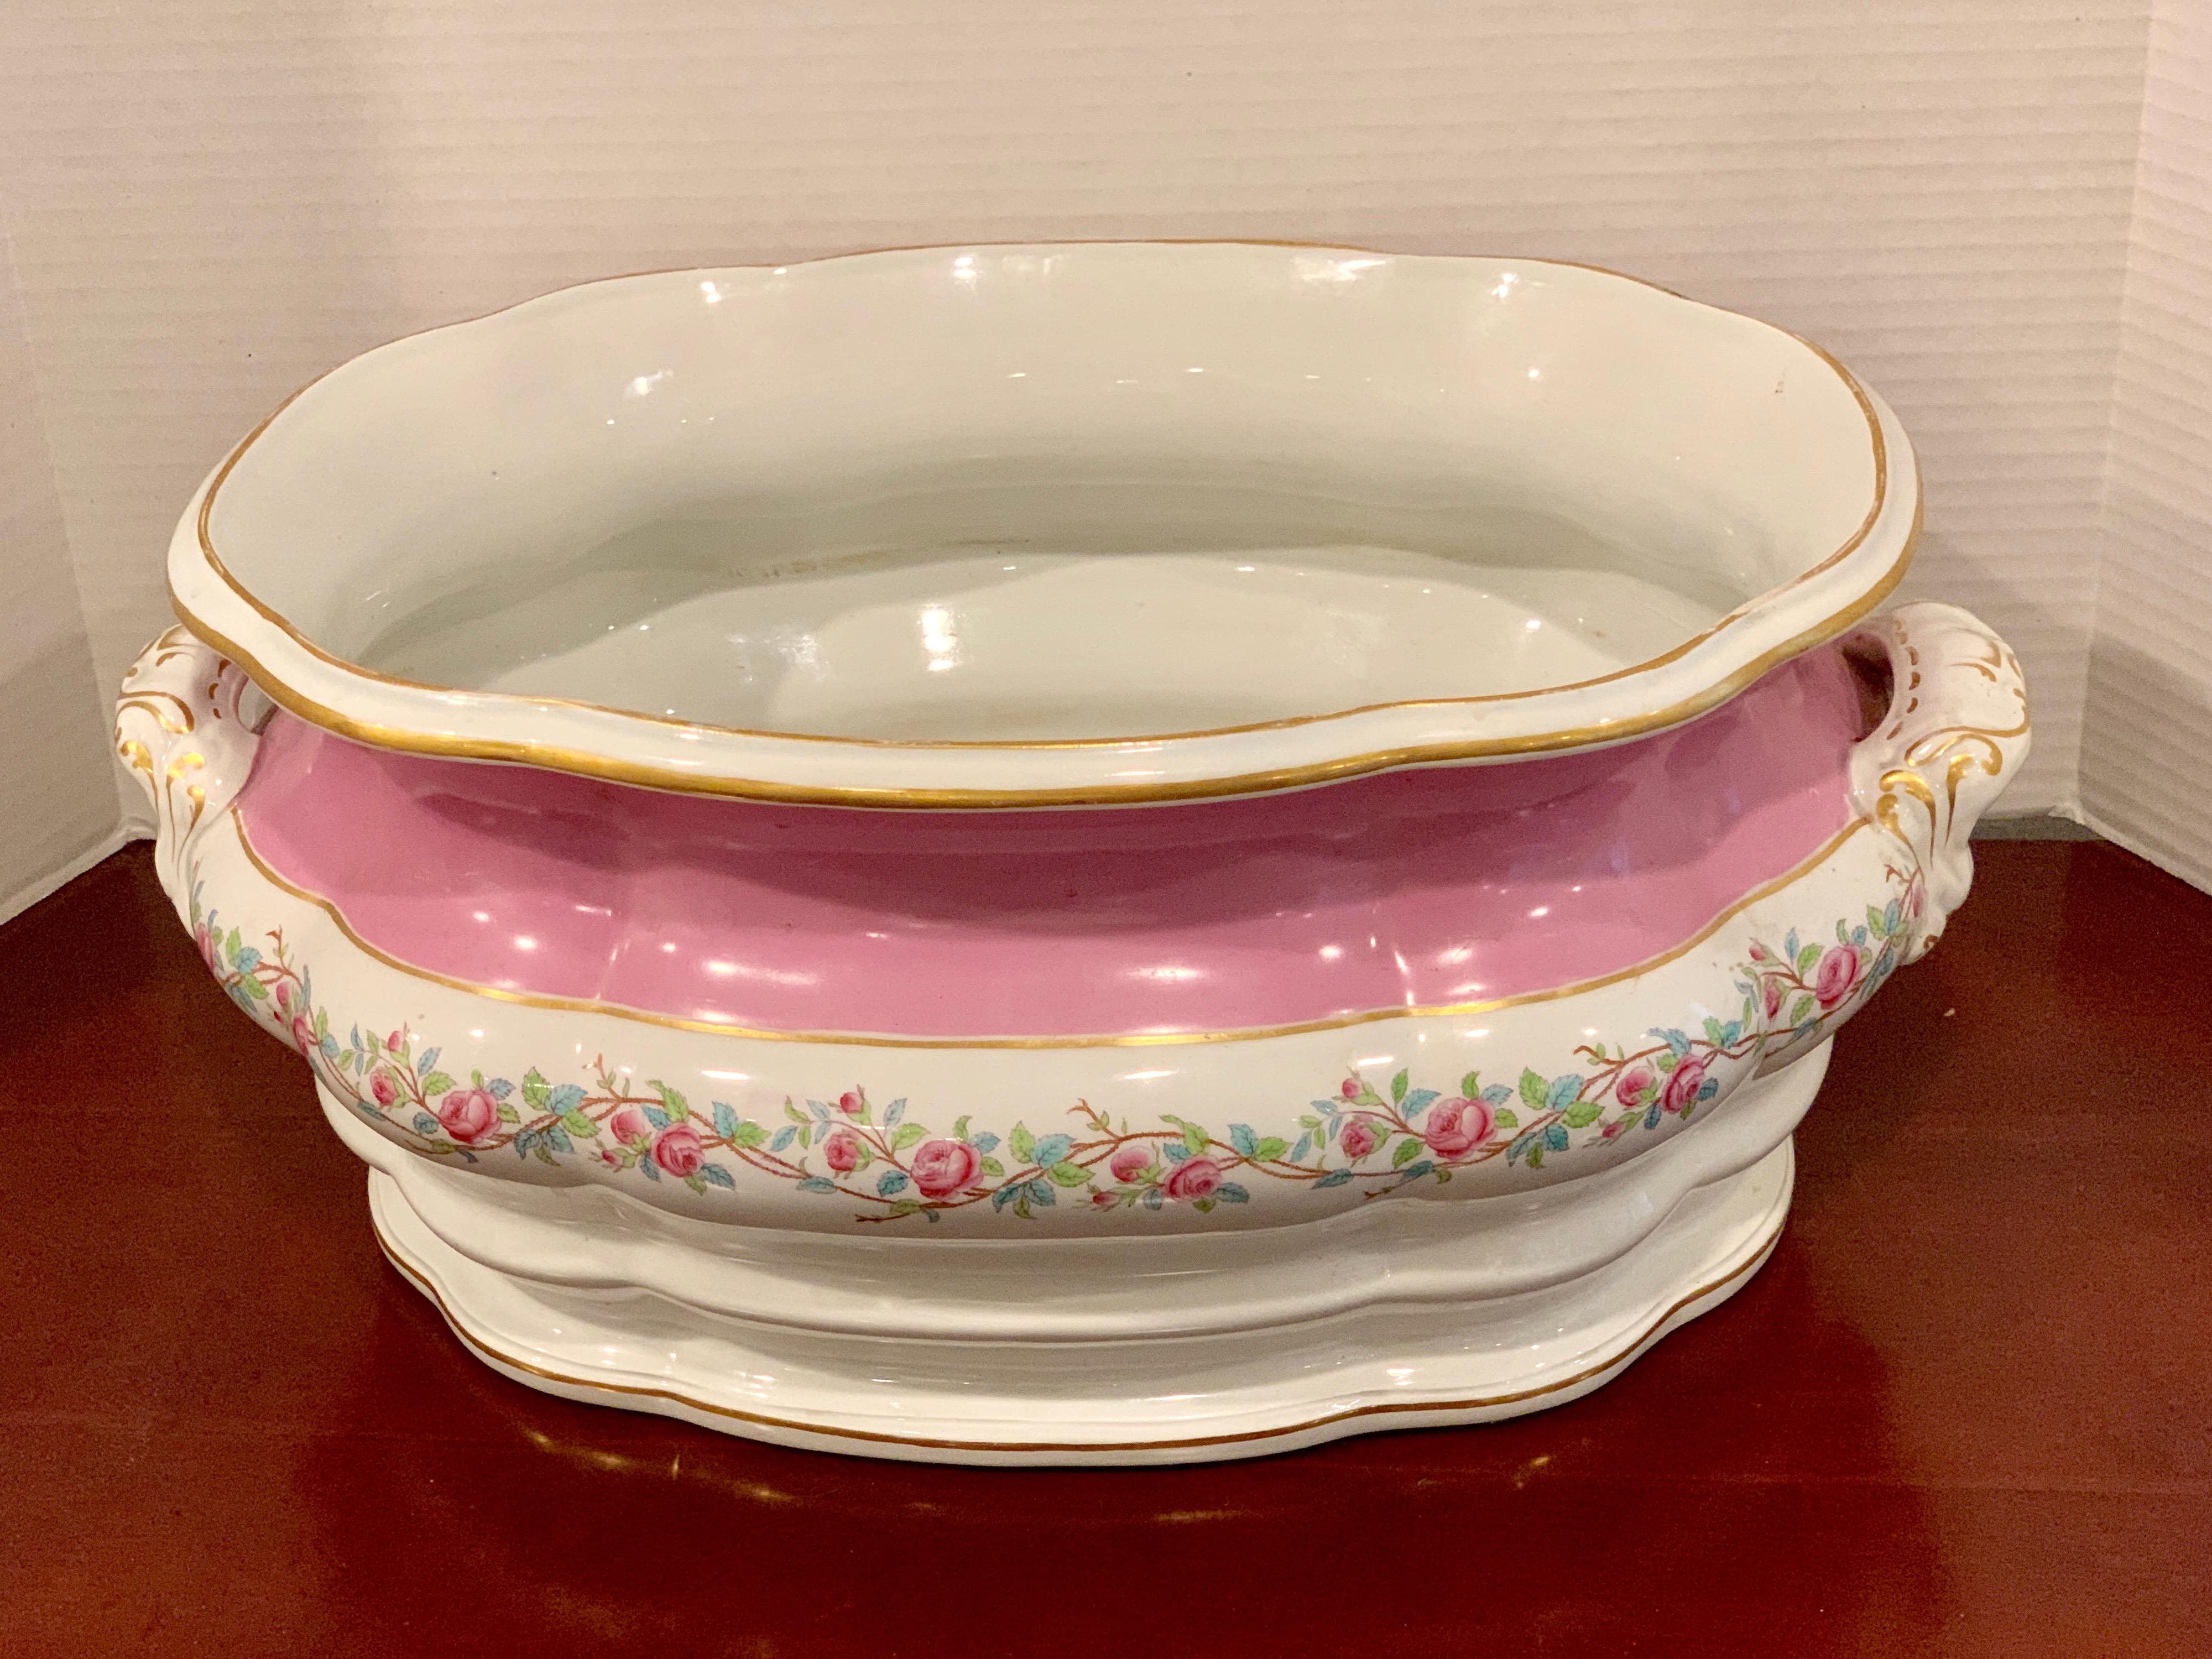 Painted 19th Century Pink Floral Porcelain Foot Bath, Attributed to Mintons For Sale